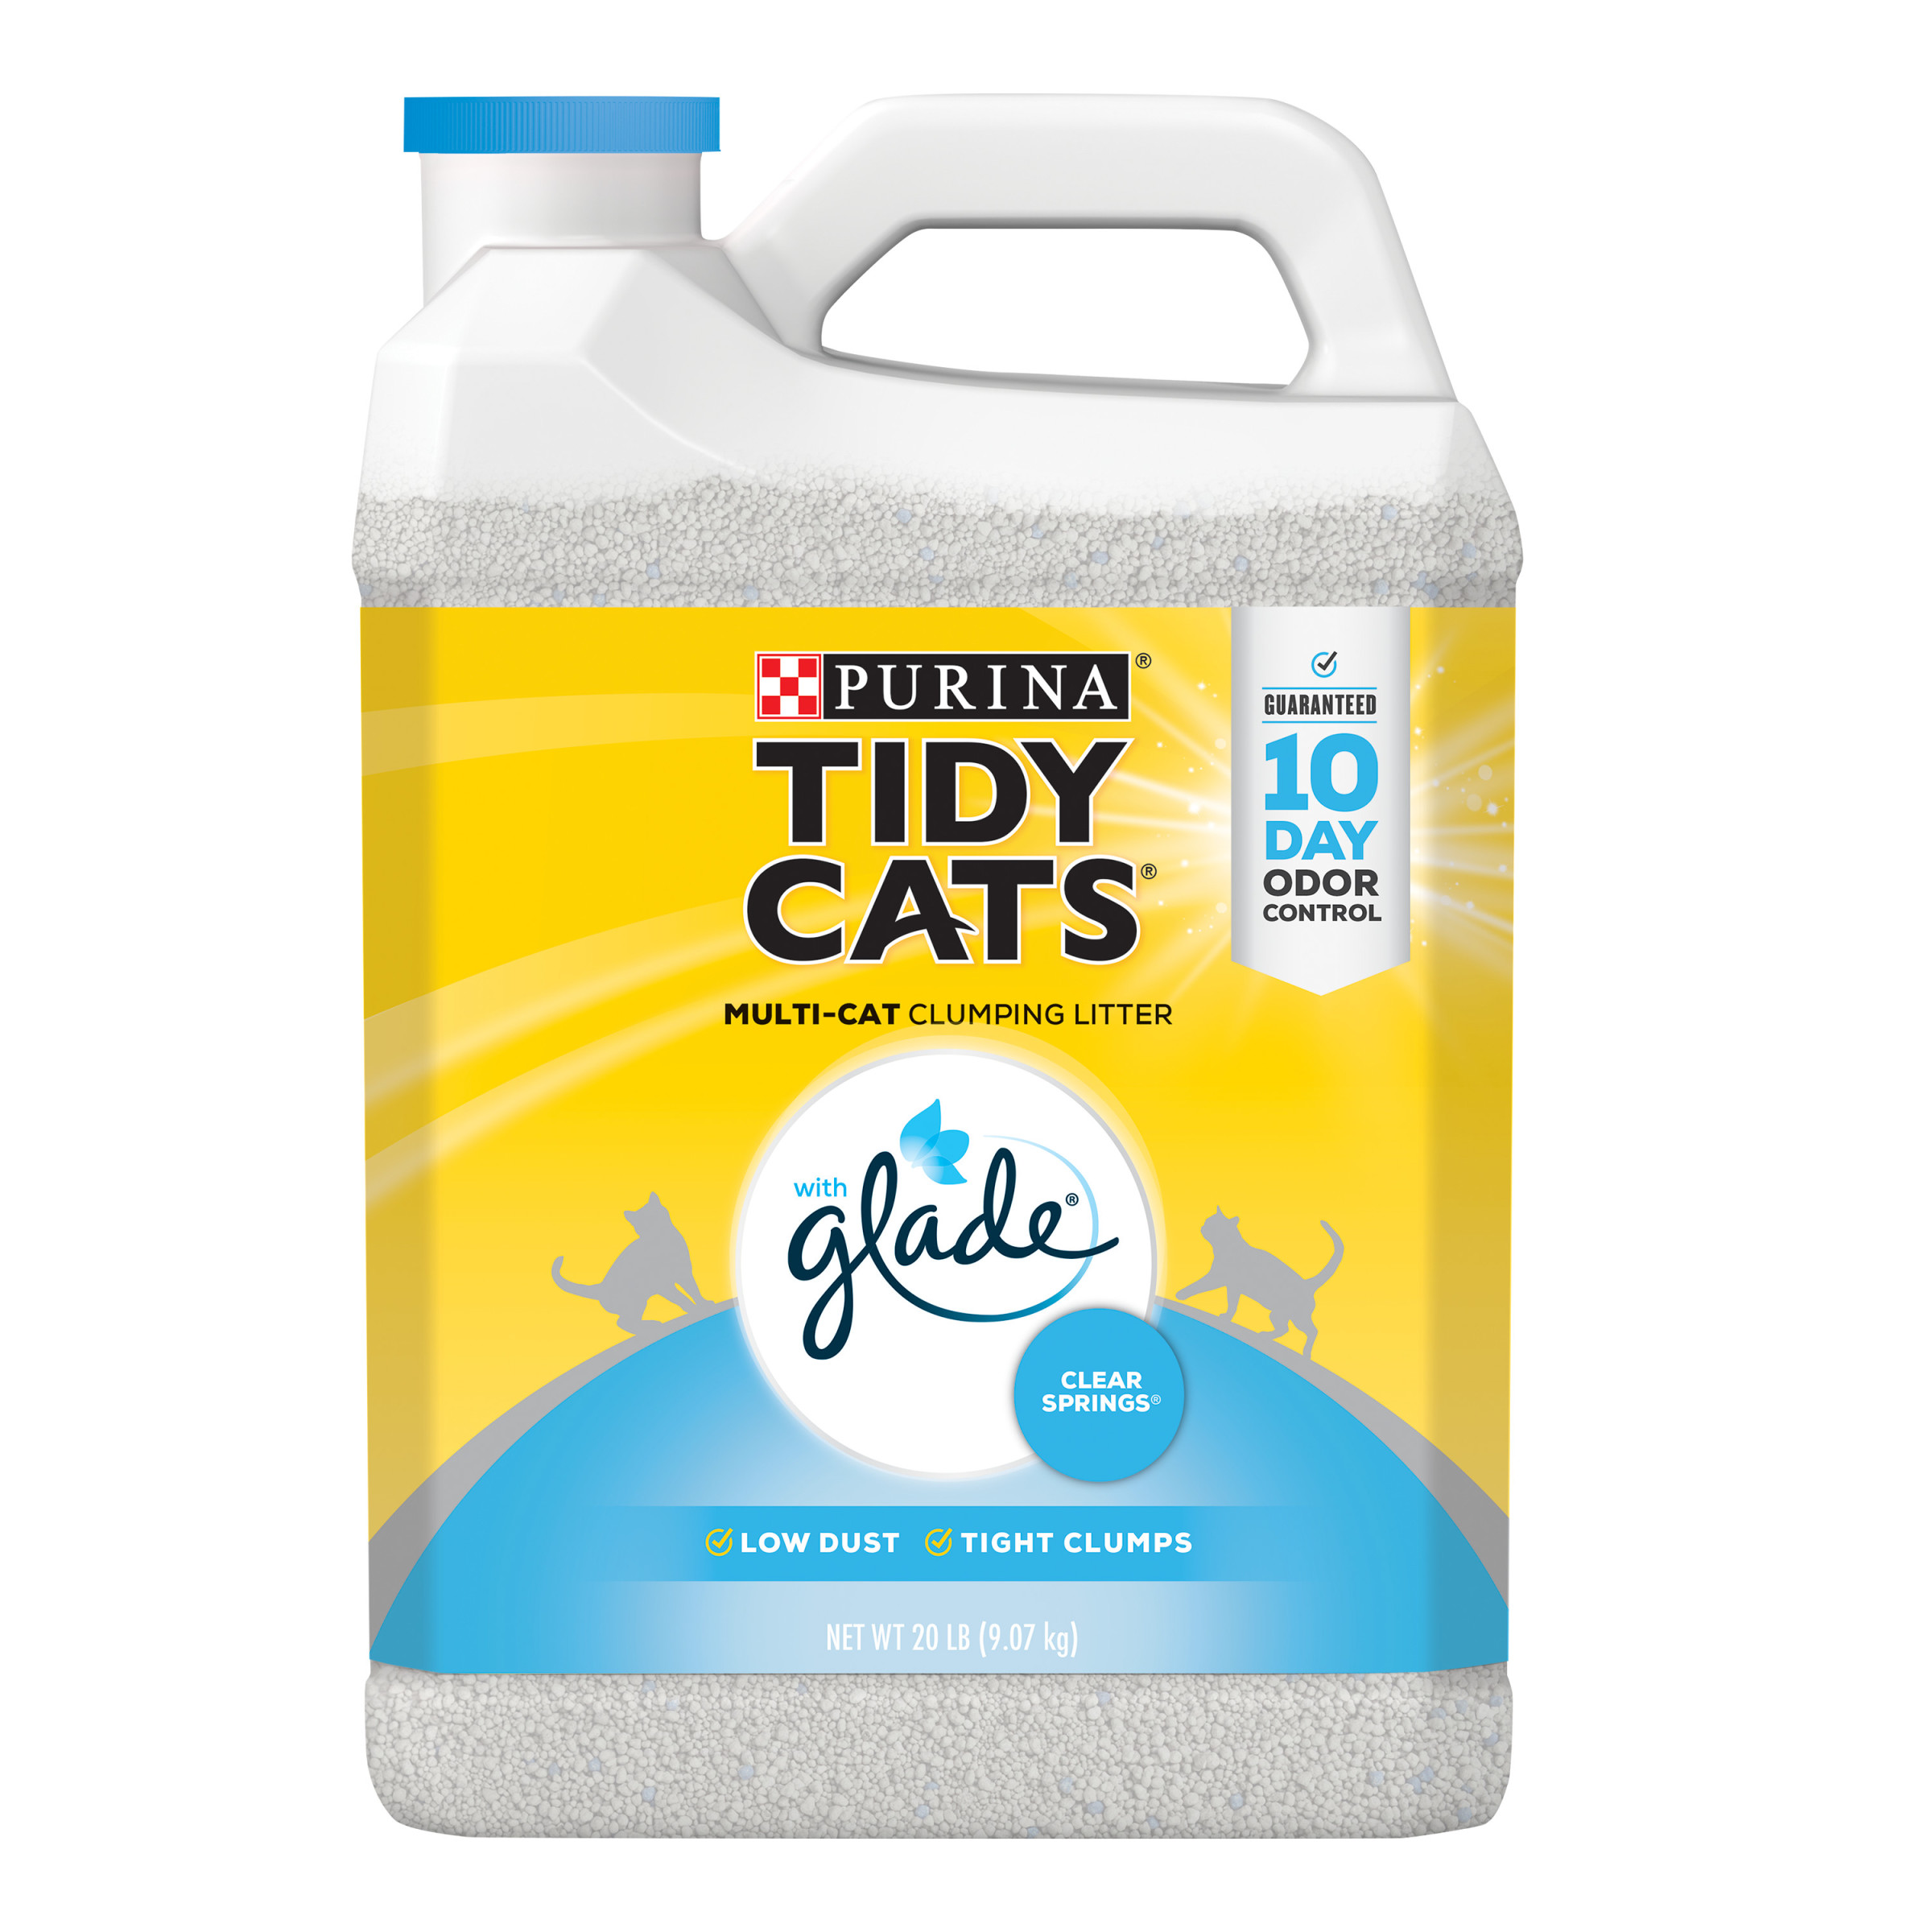 Purina Tidy Cats Clumping Multi Cat Litter, Glade Clear Springs, 20 lb. Jug - image 1 of 9